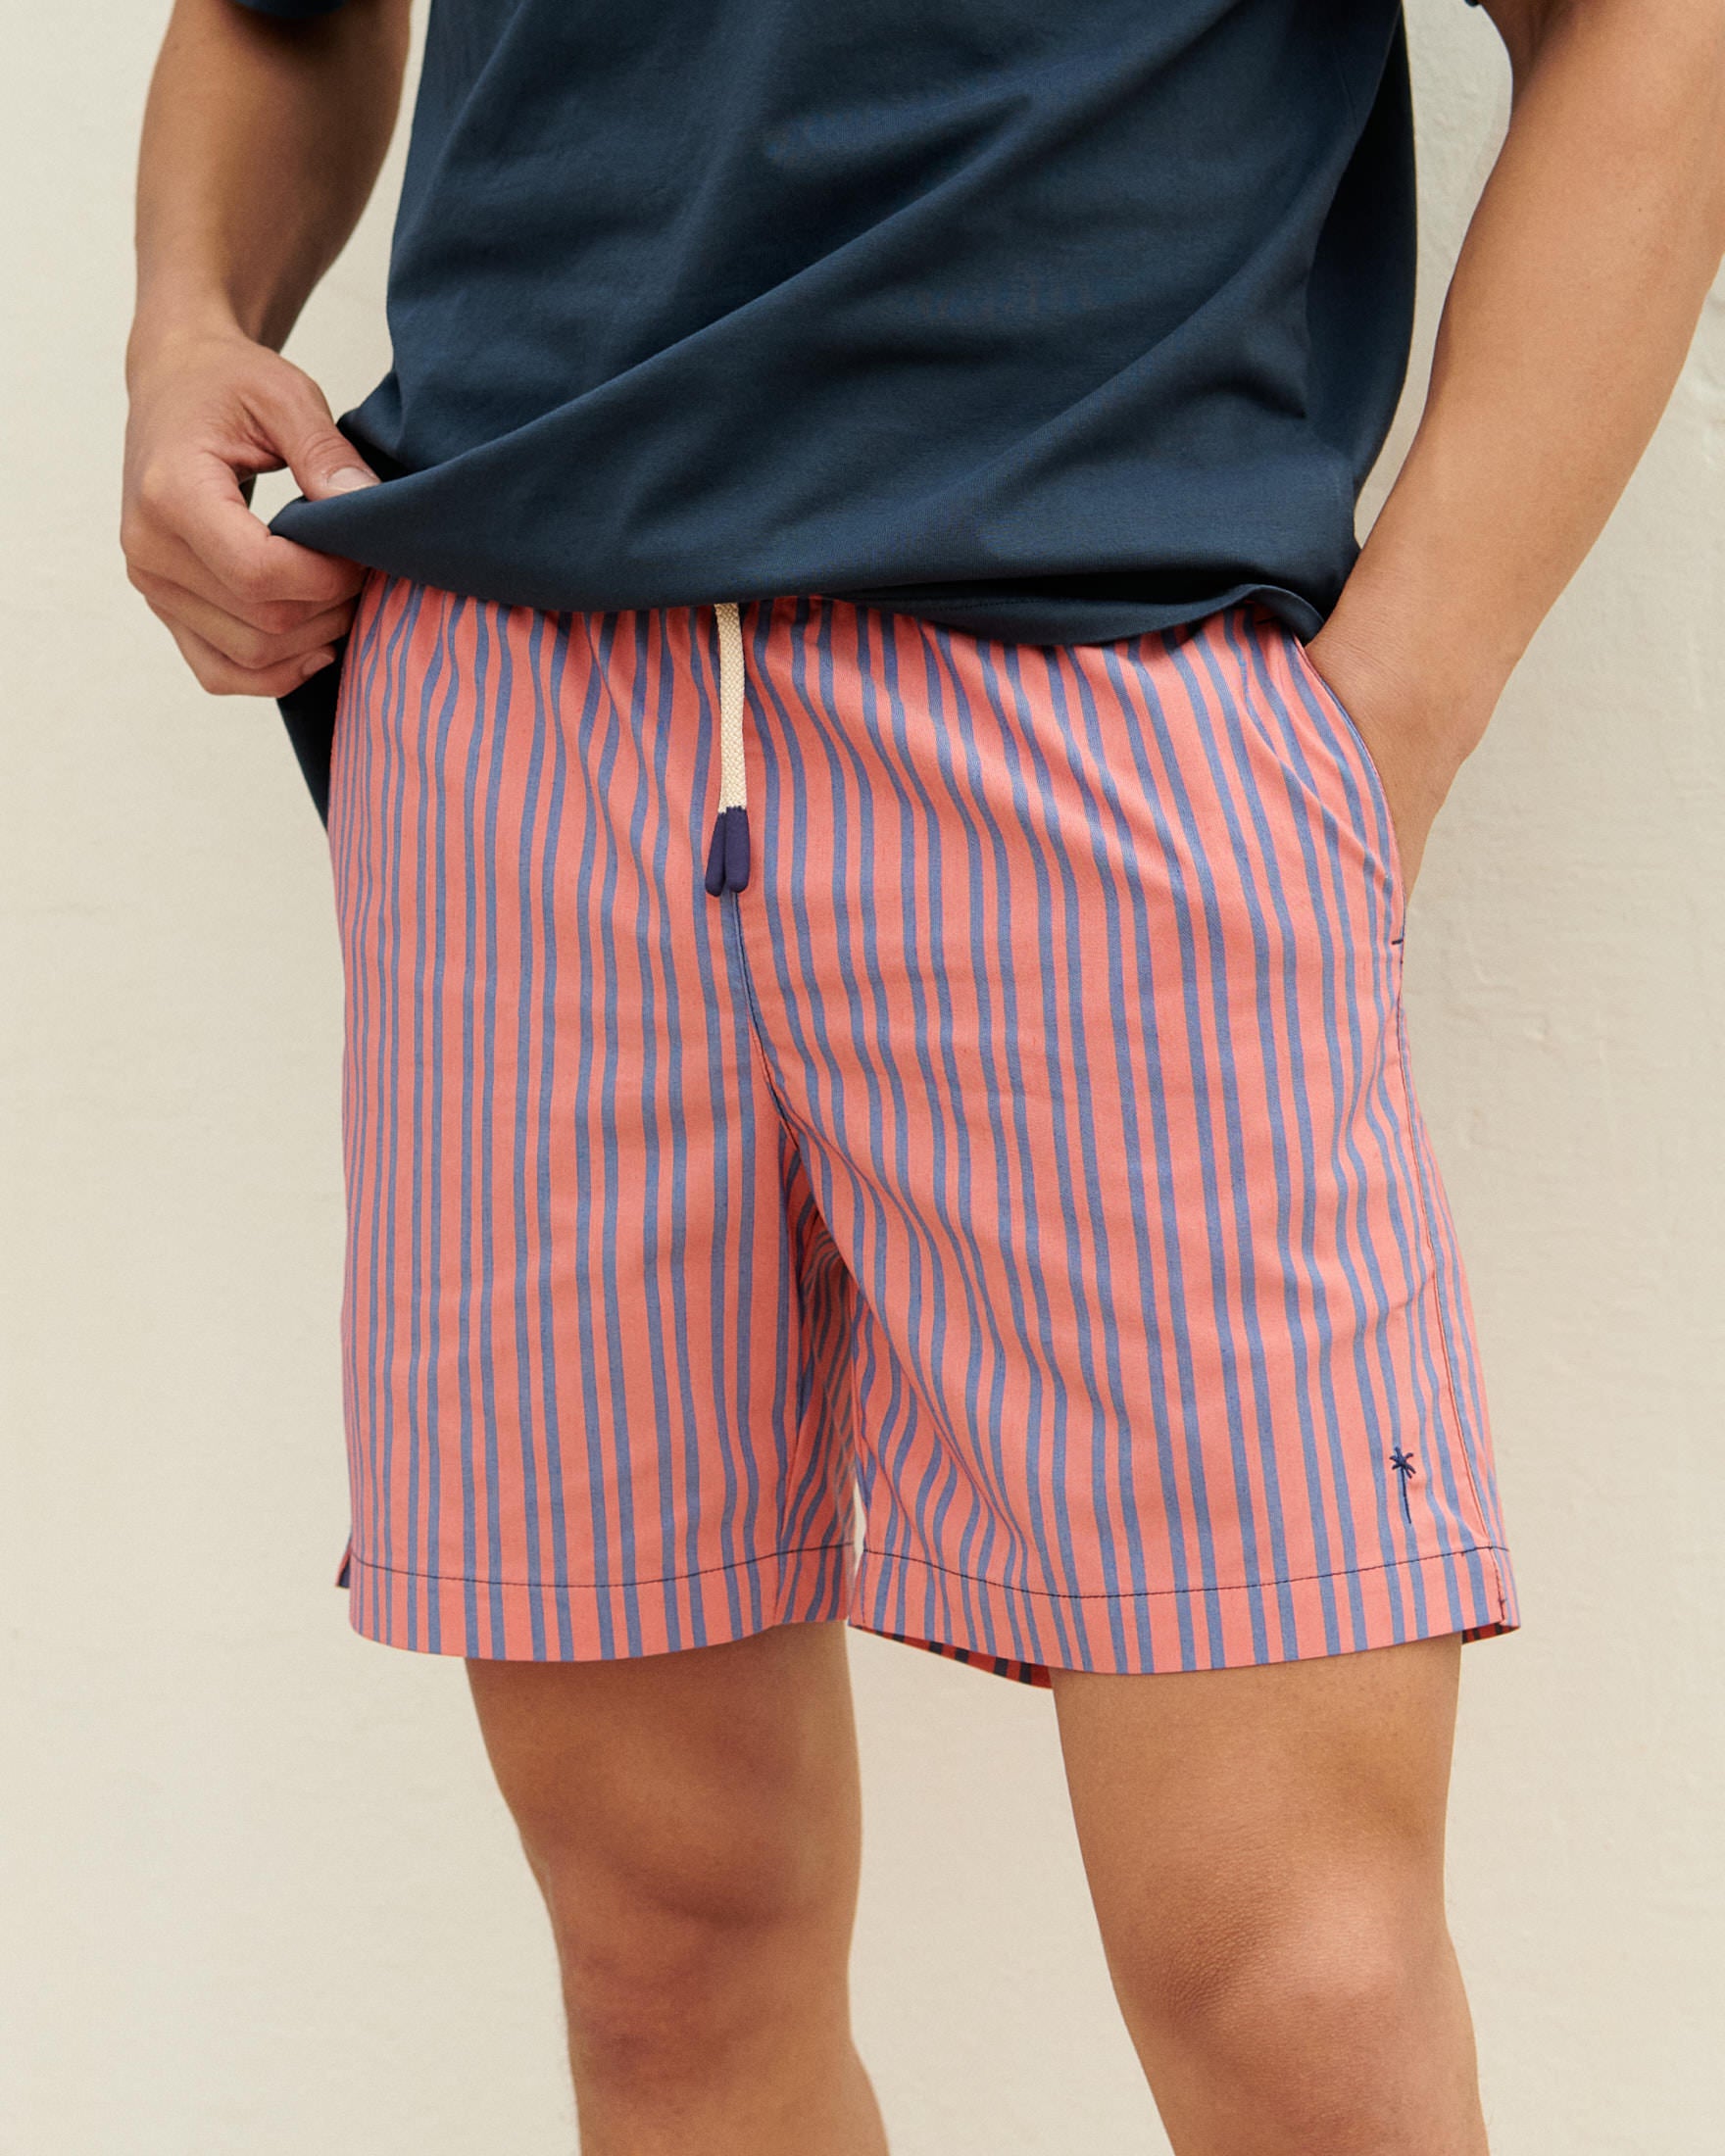 Printed Swim Shorts - Red And Navy Blue